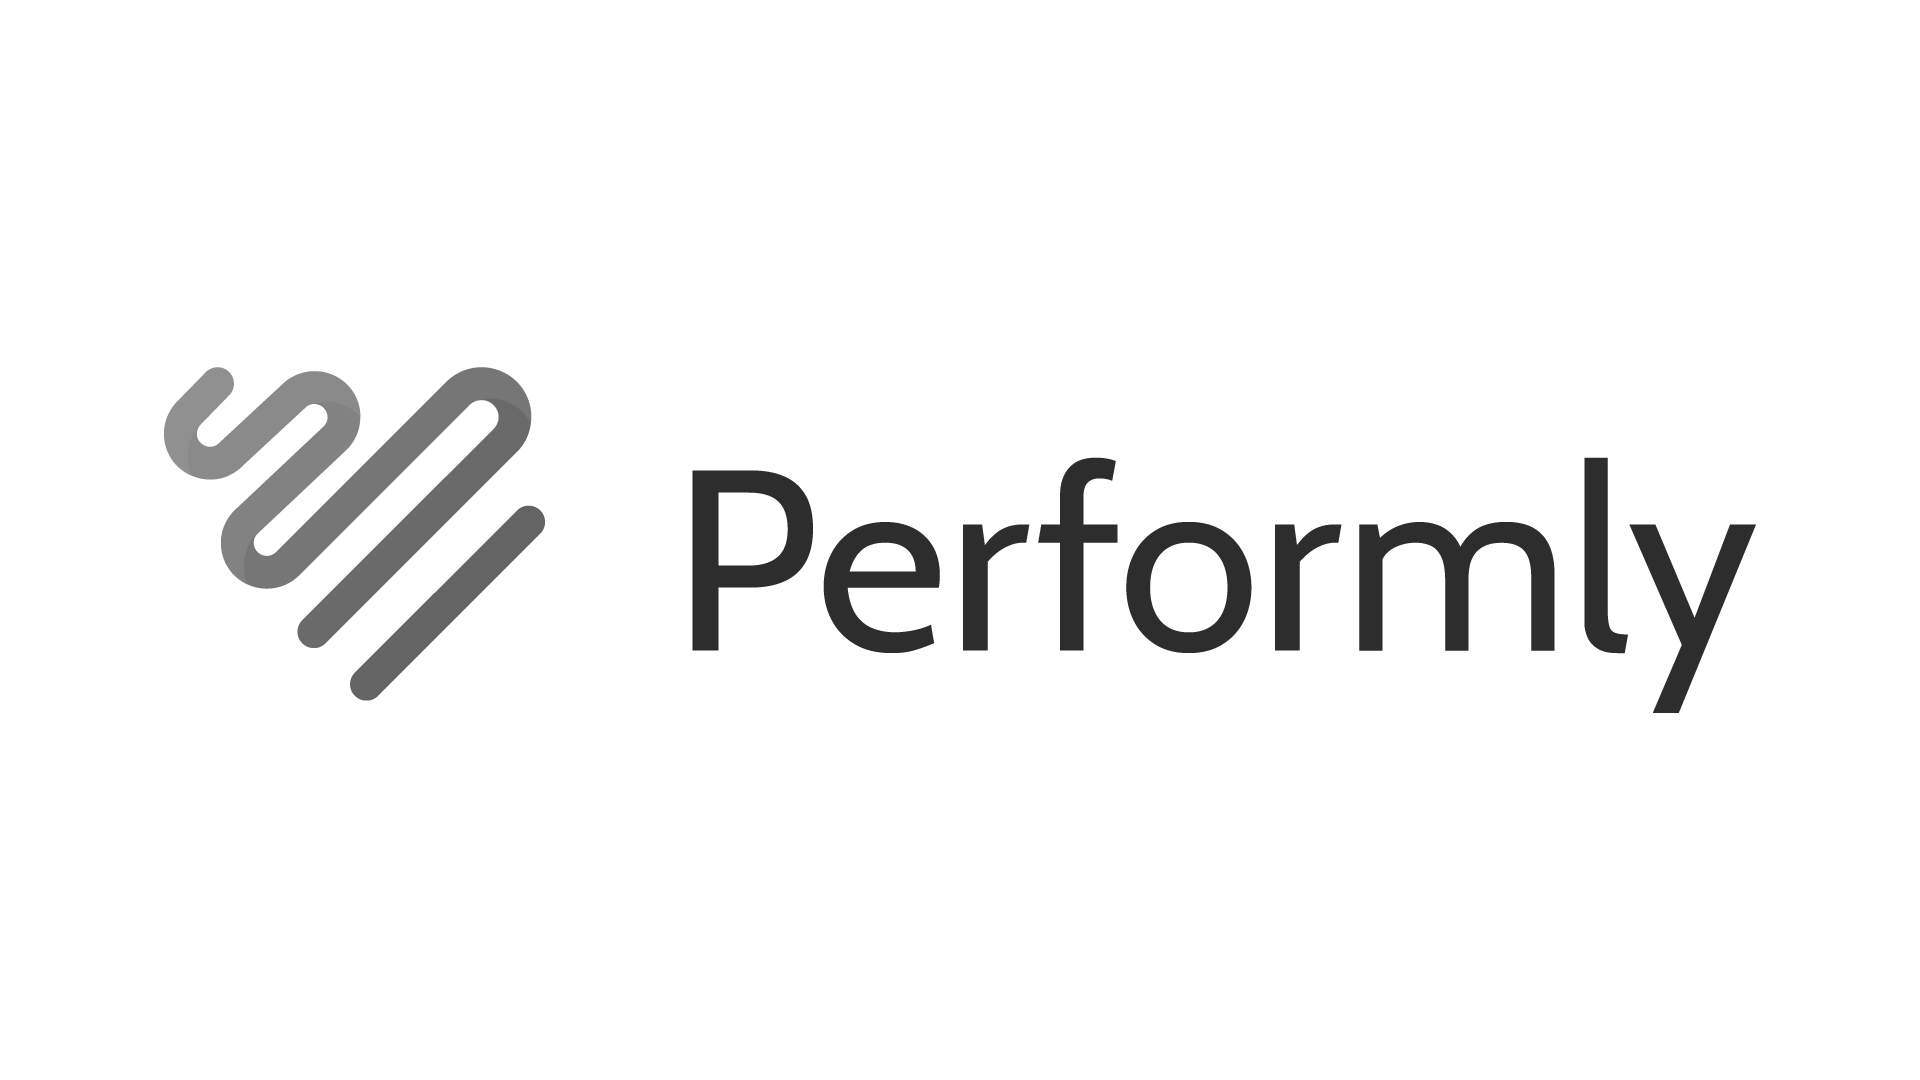 Perform-ly